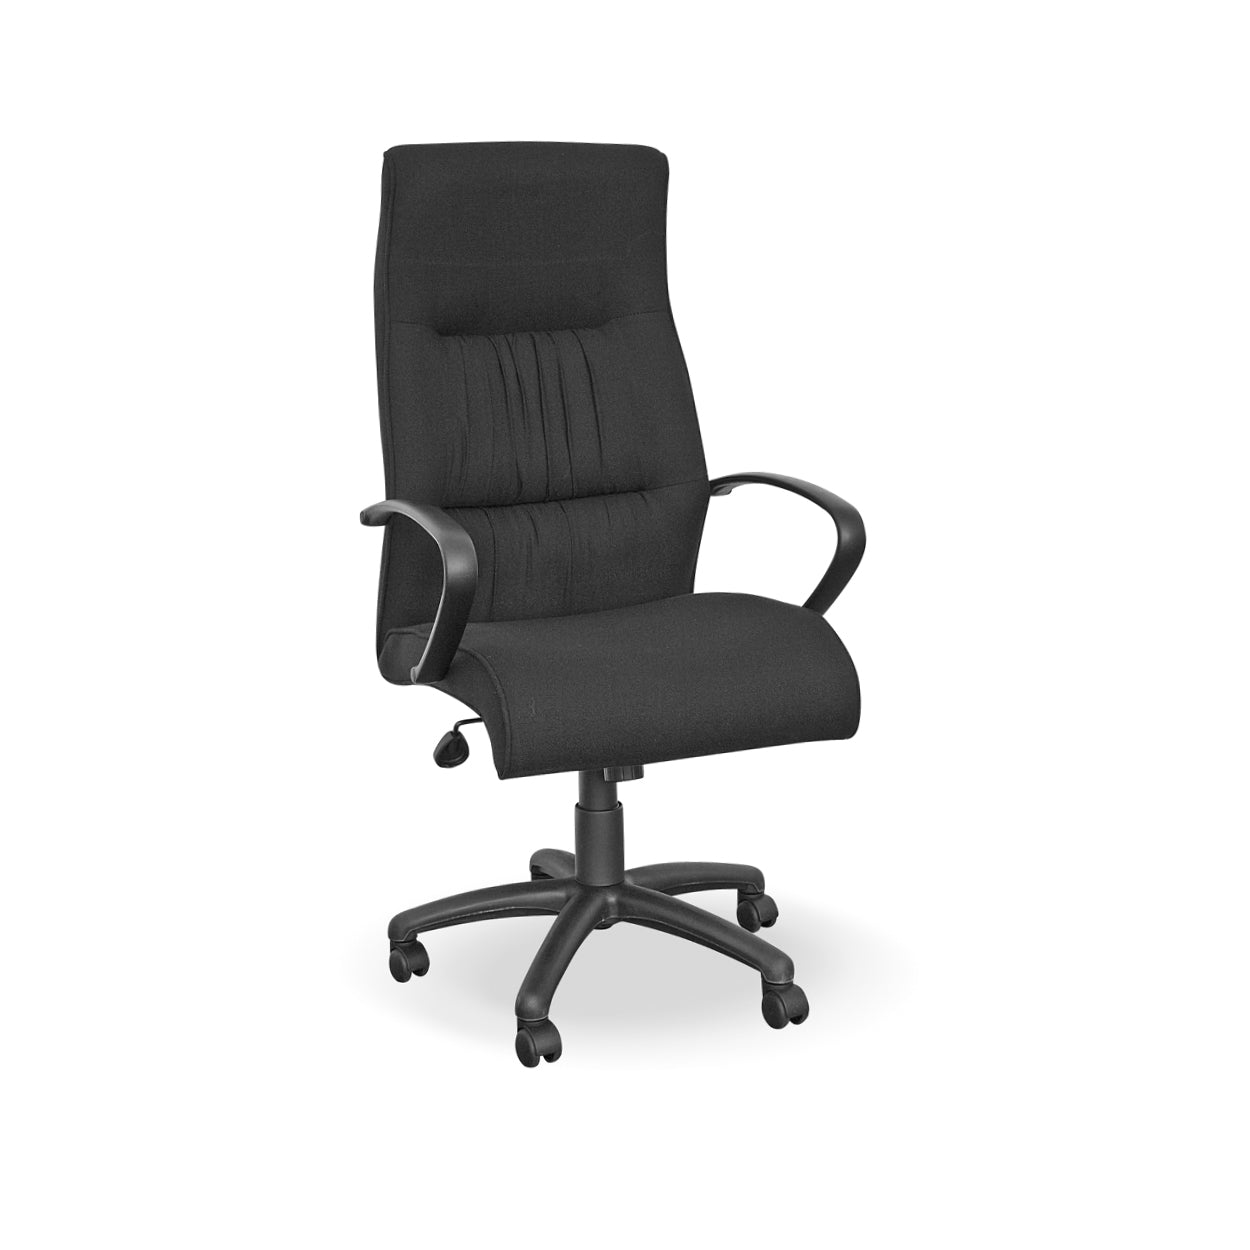 Hedcor Salvador PU office chair